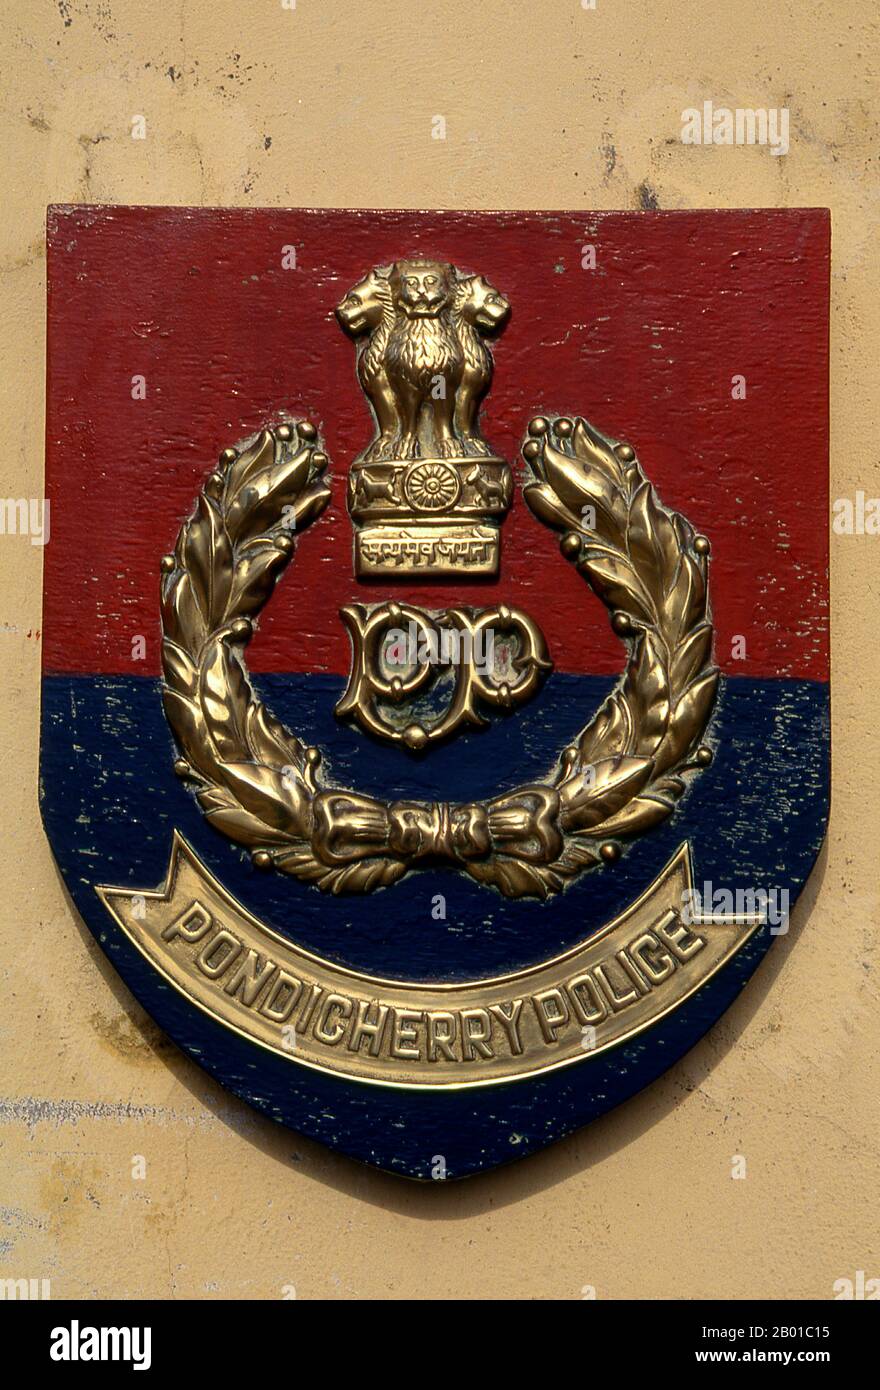 India: Pondicherry police emblem.  Pondicherry was the capital of the former French territories in India. Besides Pondi itself – acquired from a local ruler in 1674 – these included Chandernagore in Bengal (1690); Mahé in Kerala (1725); Yanam in Andhra Pradesh (1731); and Karaikal in Tamil Nadu (1739). Chandernagore was returned to India three years after independence, in 1951, and was absorbed into West Bengal. Returned to India in 1956, the remaining four territories were constituted as the Union Territory of Pondicherry in 1962. Stock Photo